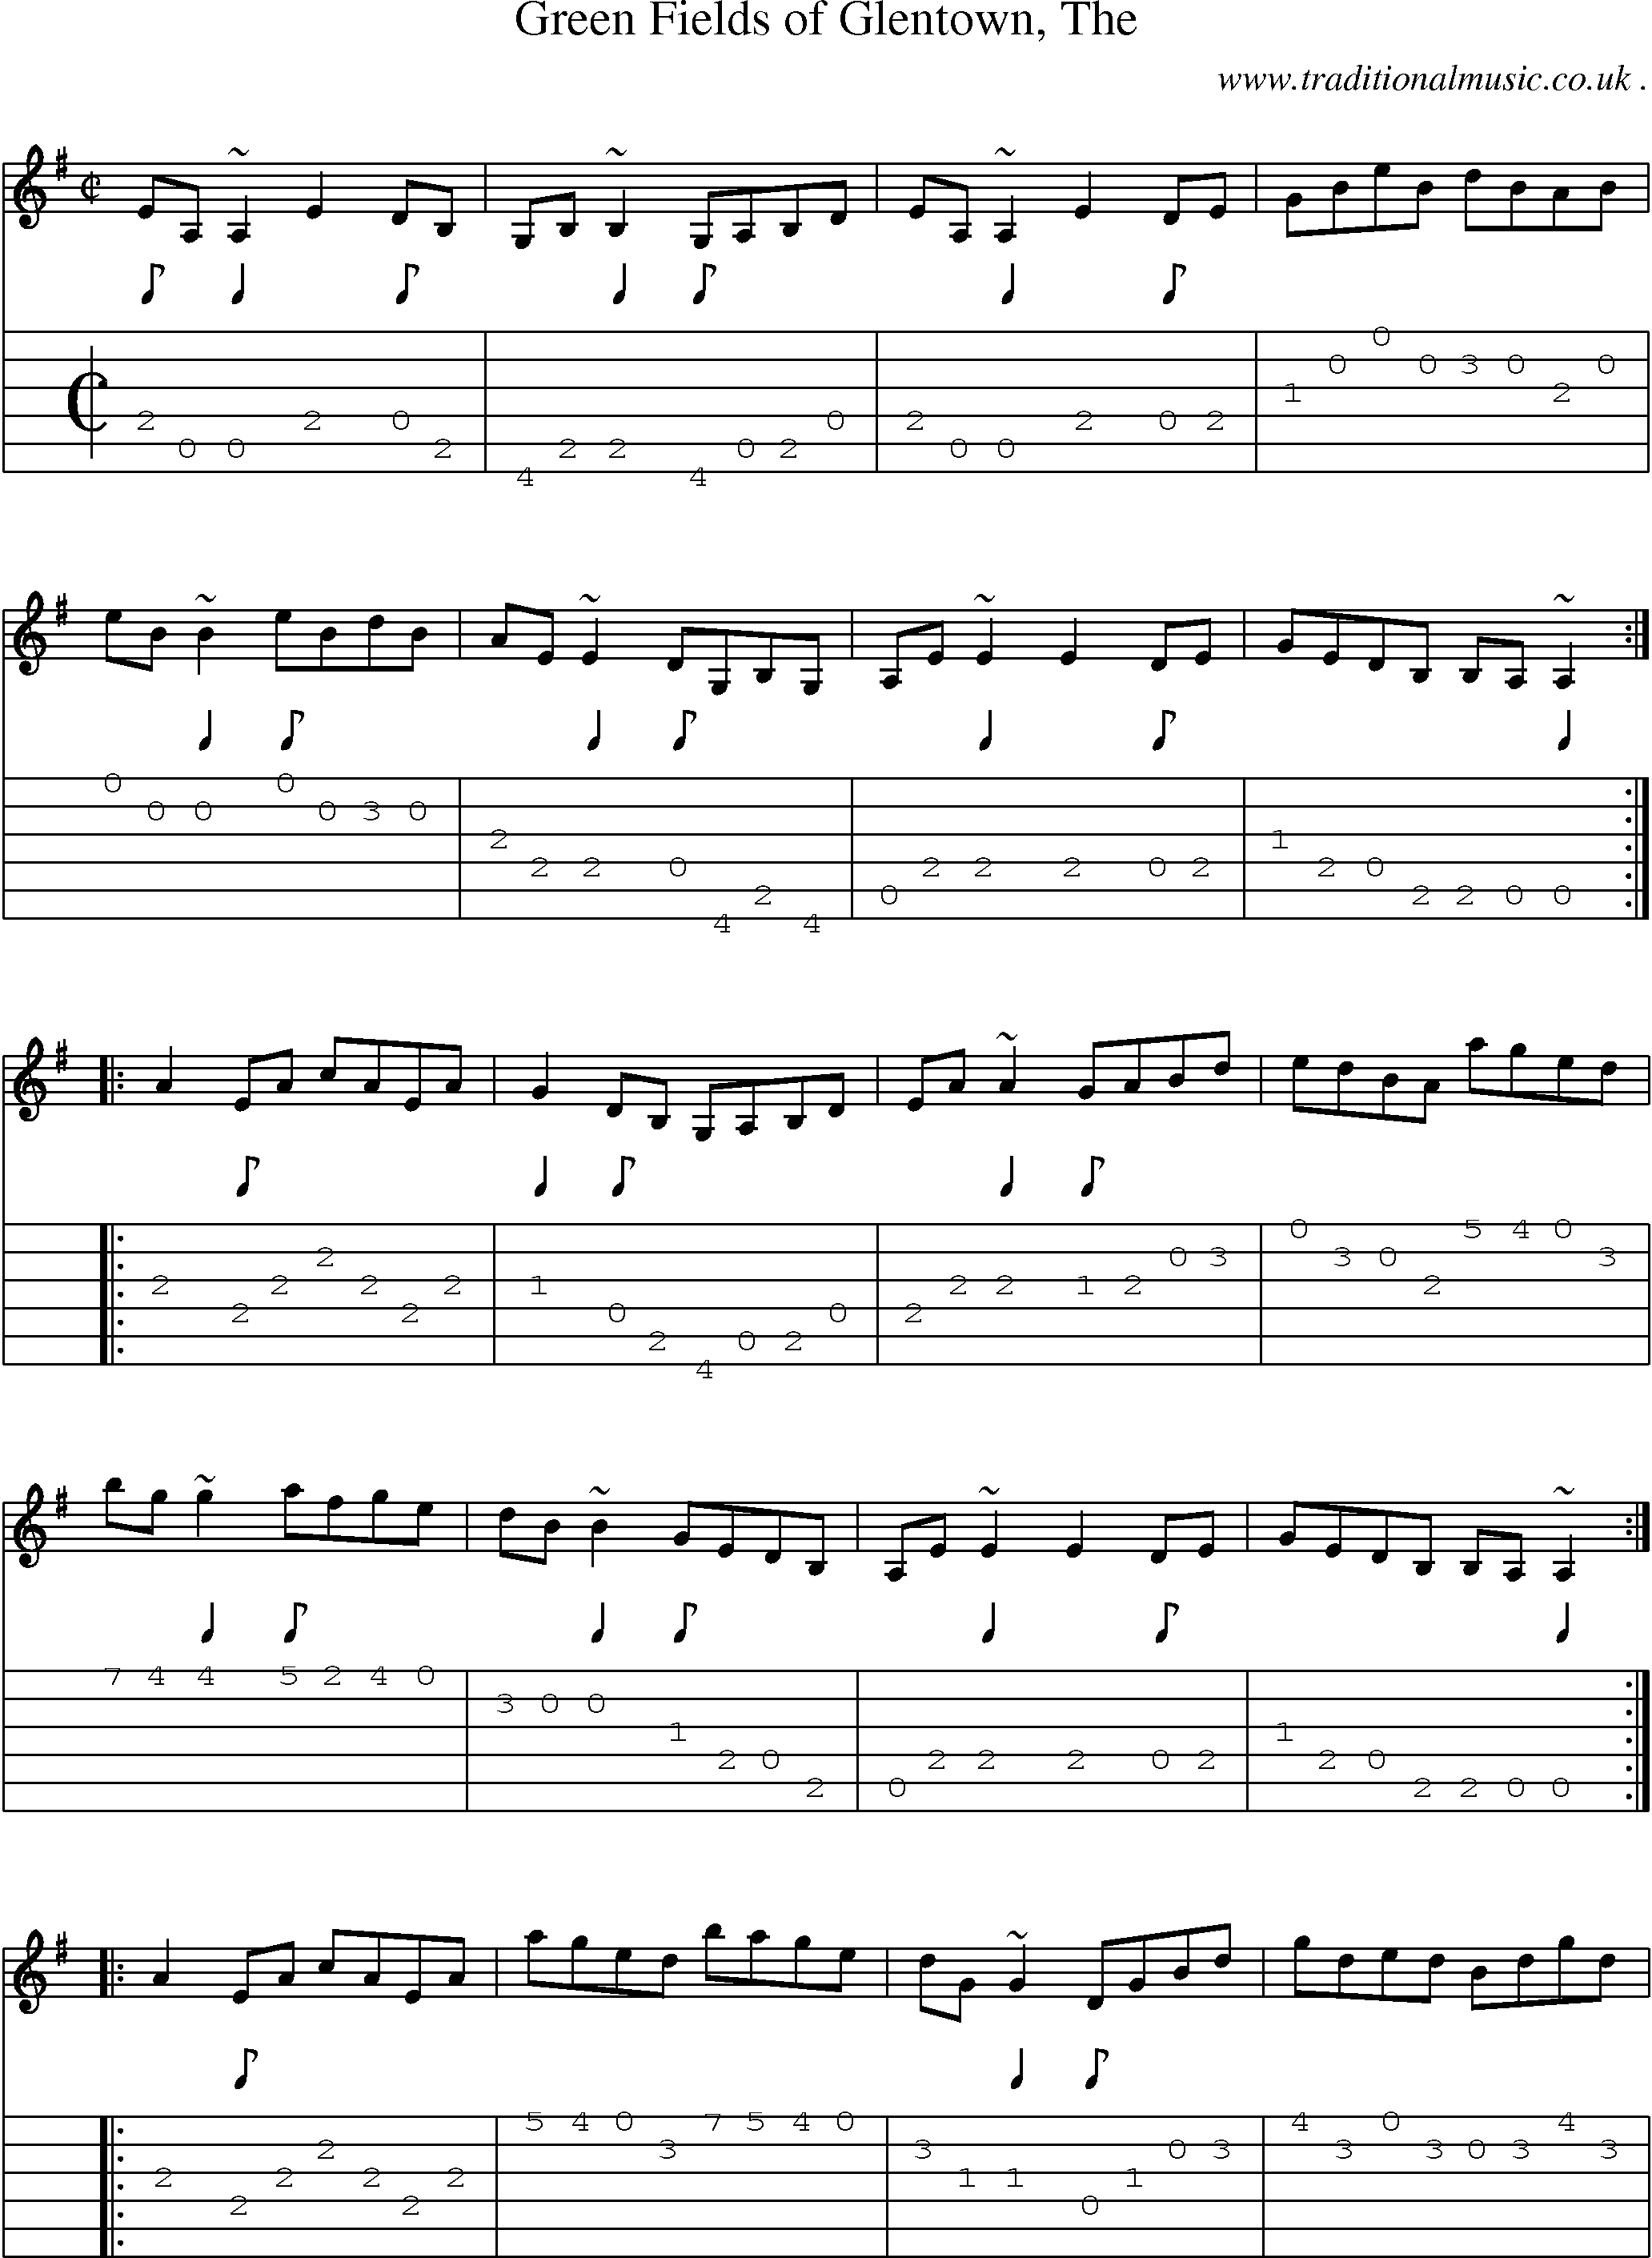 Sheet-music  score, Chords and Guitar Tabs for Green Fields Of Glentown The